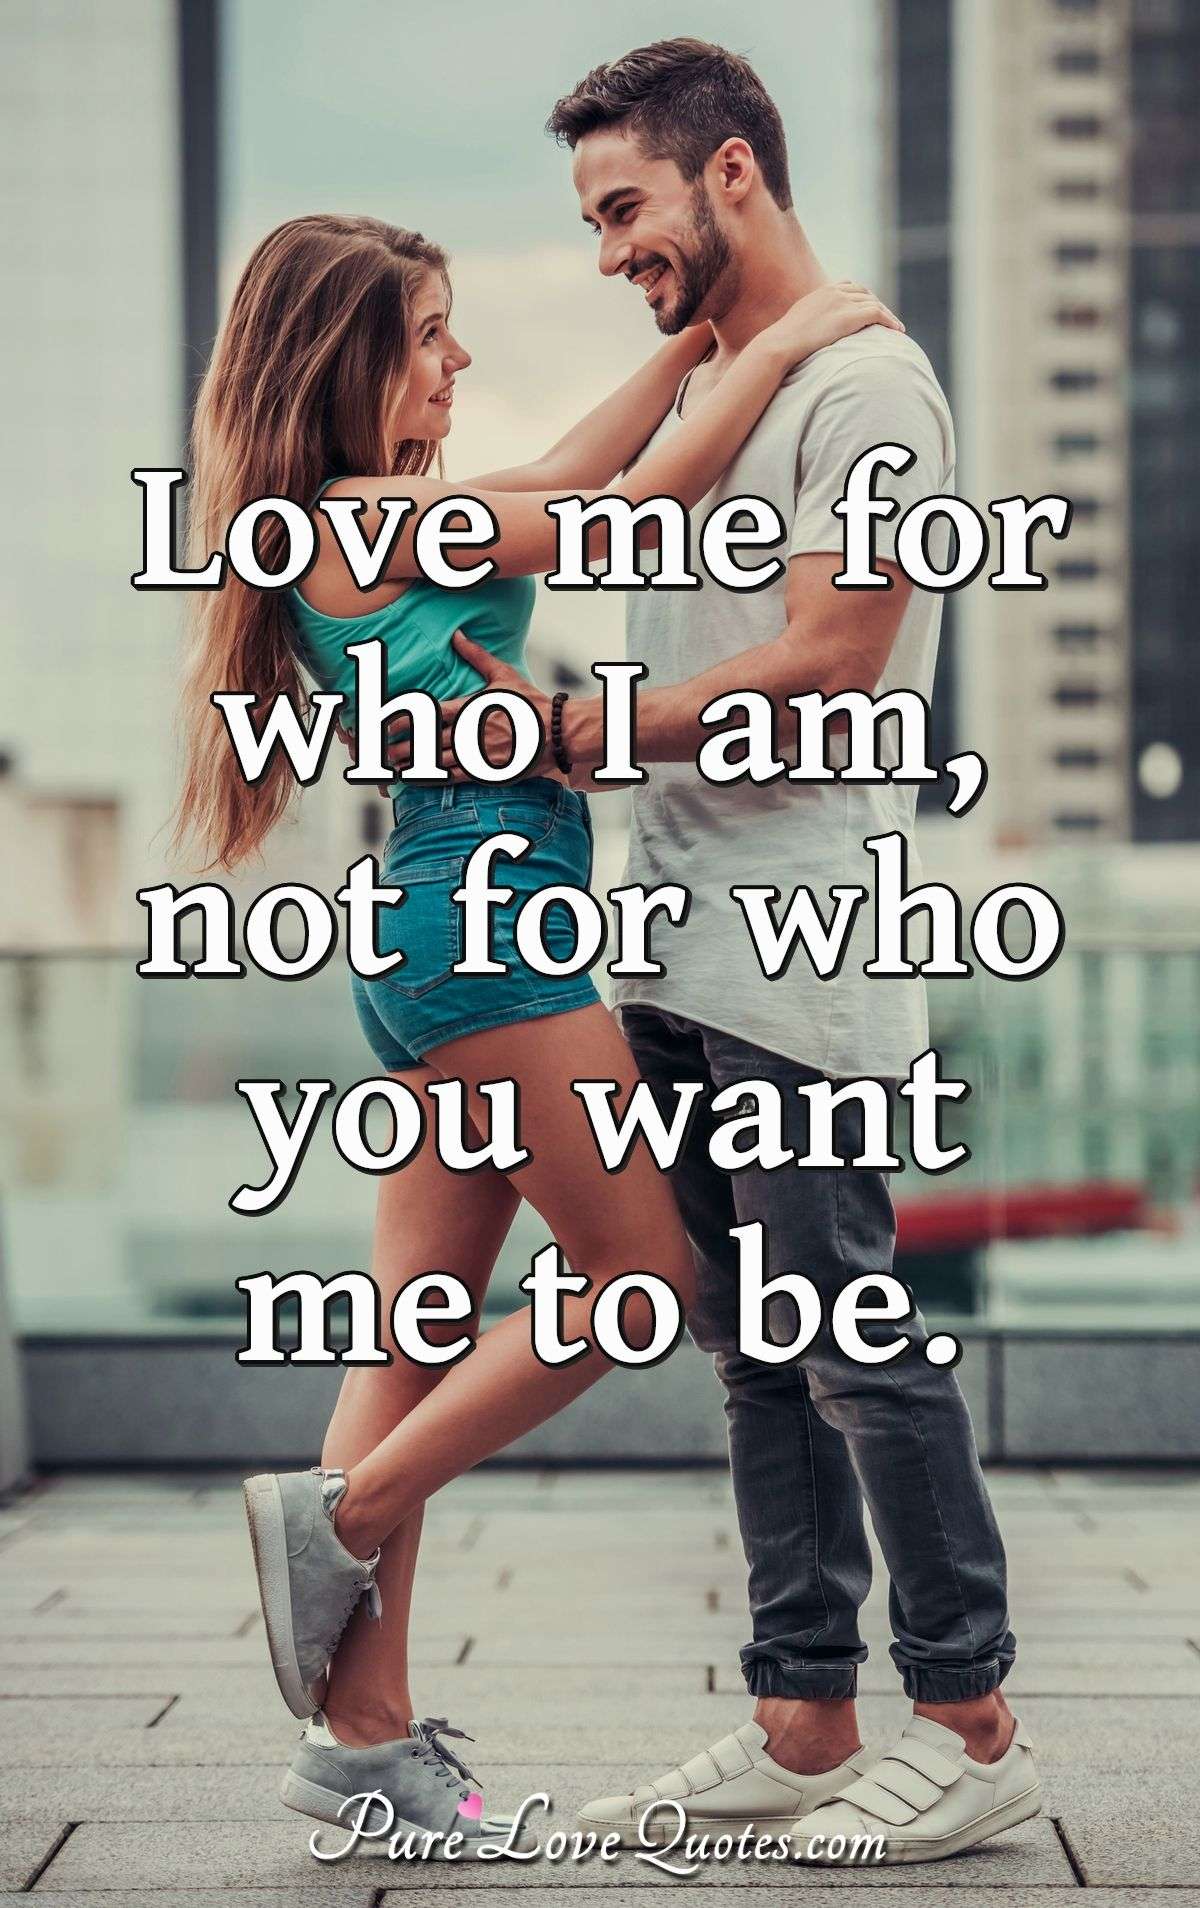 Love me for who I am, not for who you want me to be. - Anonymous